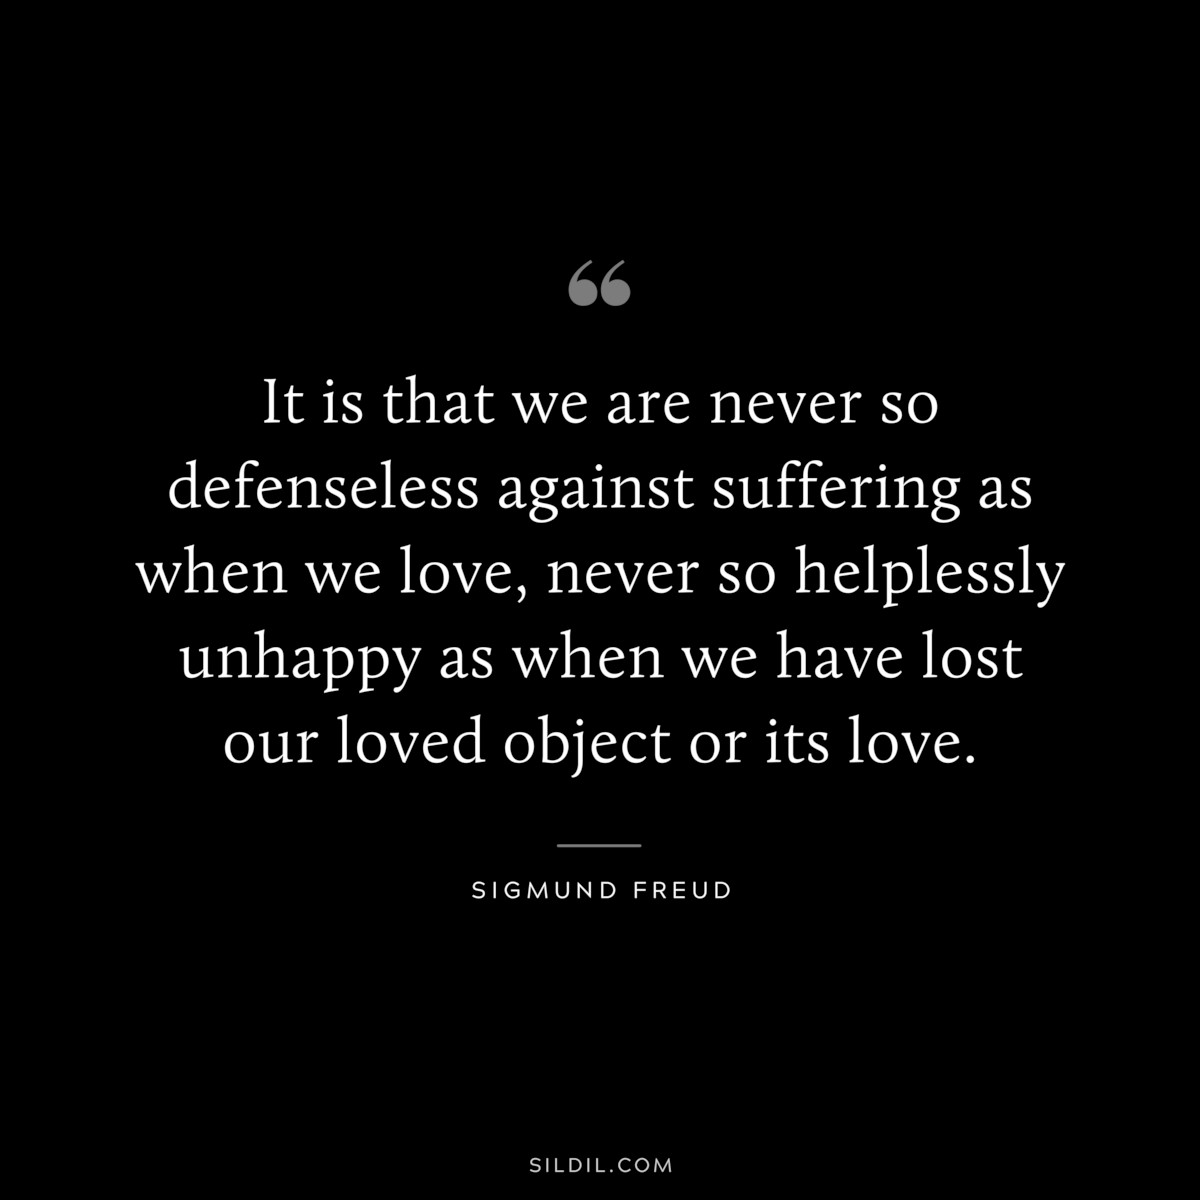 It is that we are never so defenseless against suffering as when we love, never so helplessly unhappy as when we have lost our loved object or its love. ― Sigmund Frued